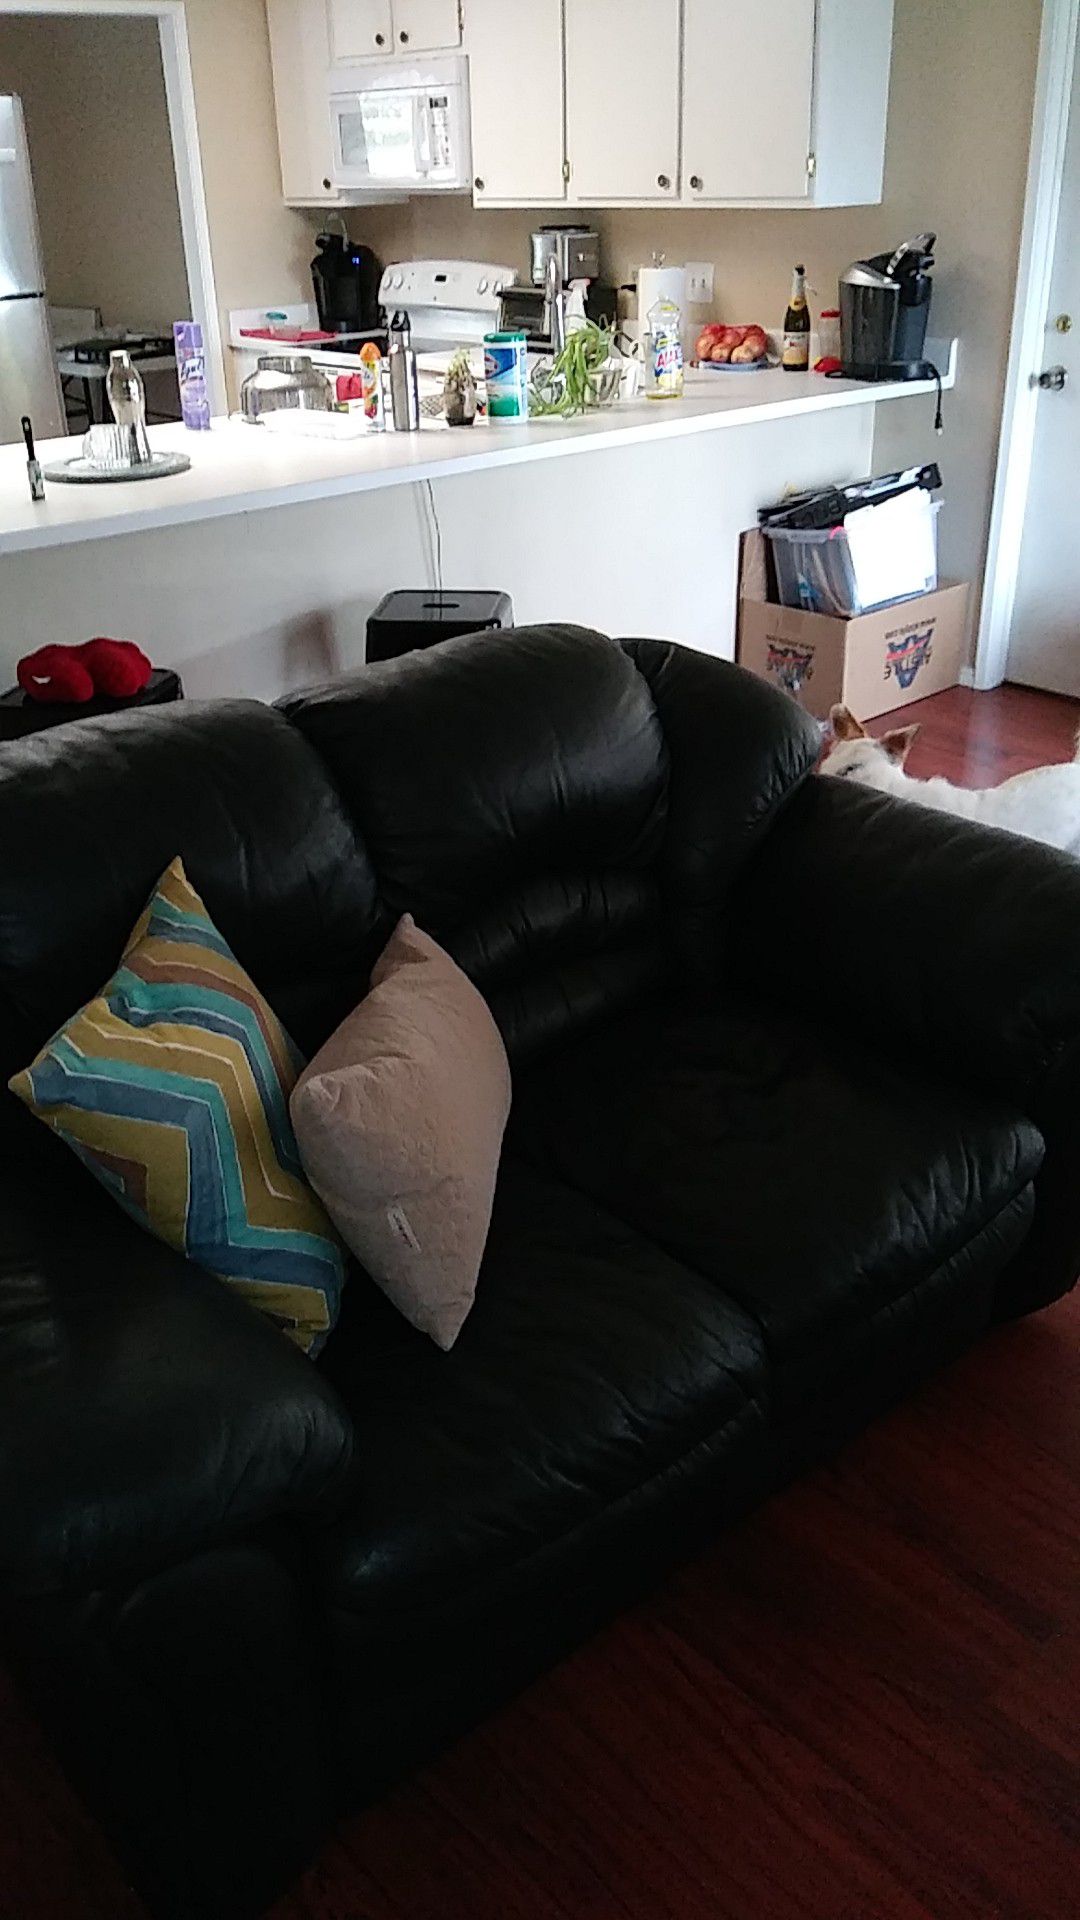 Leather sofa and loveseat